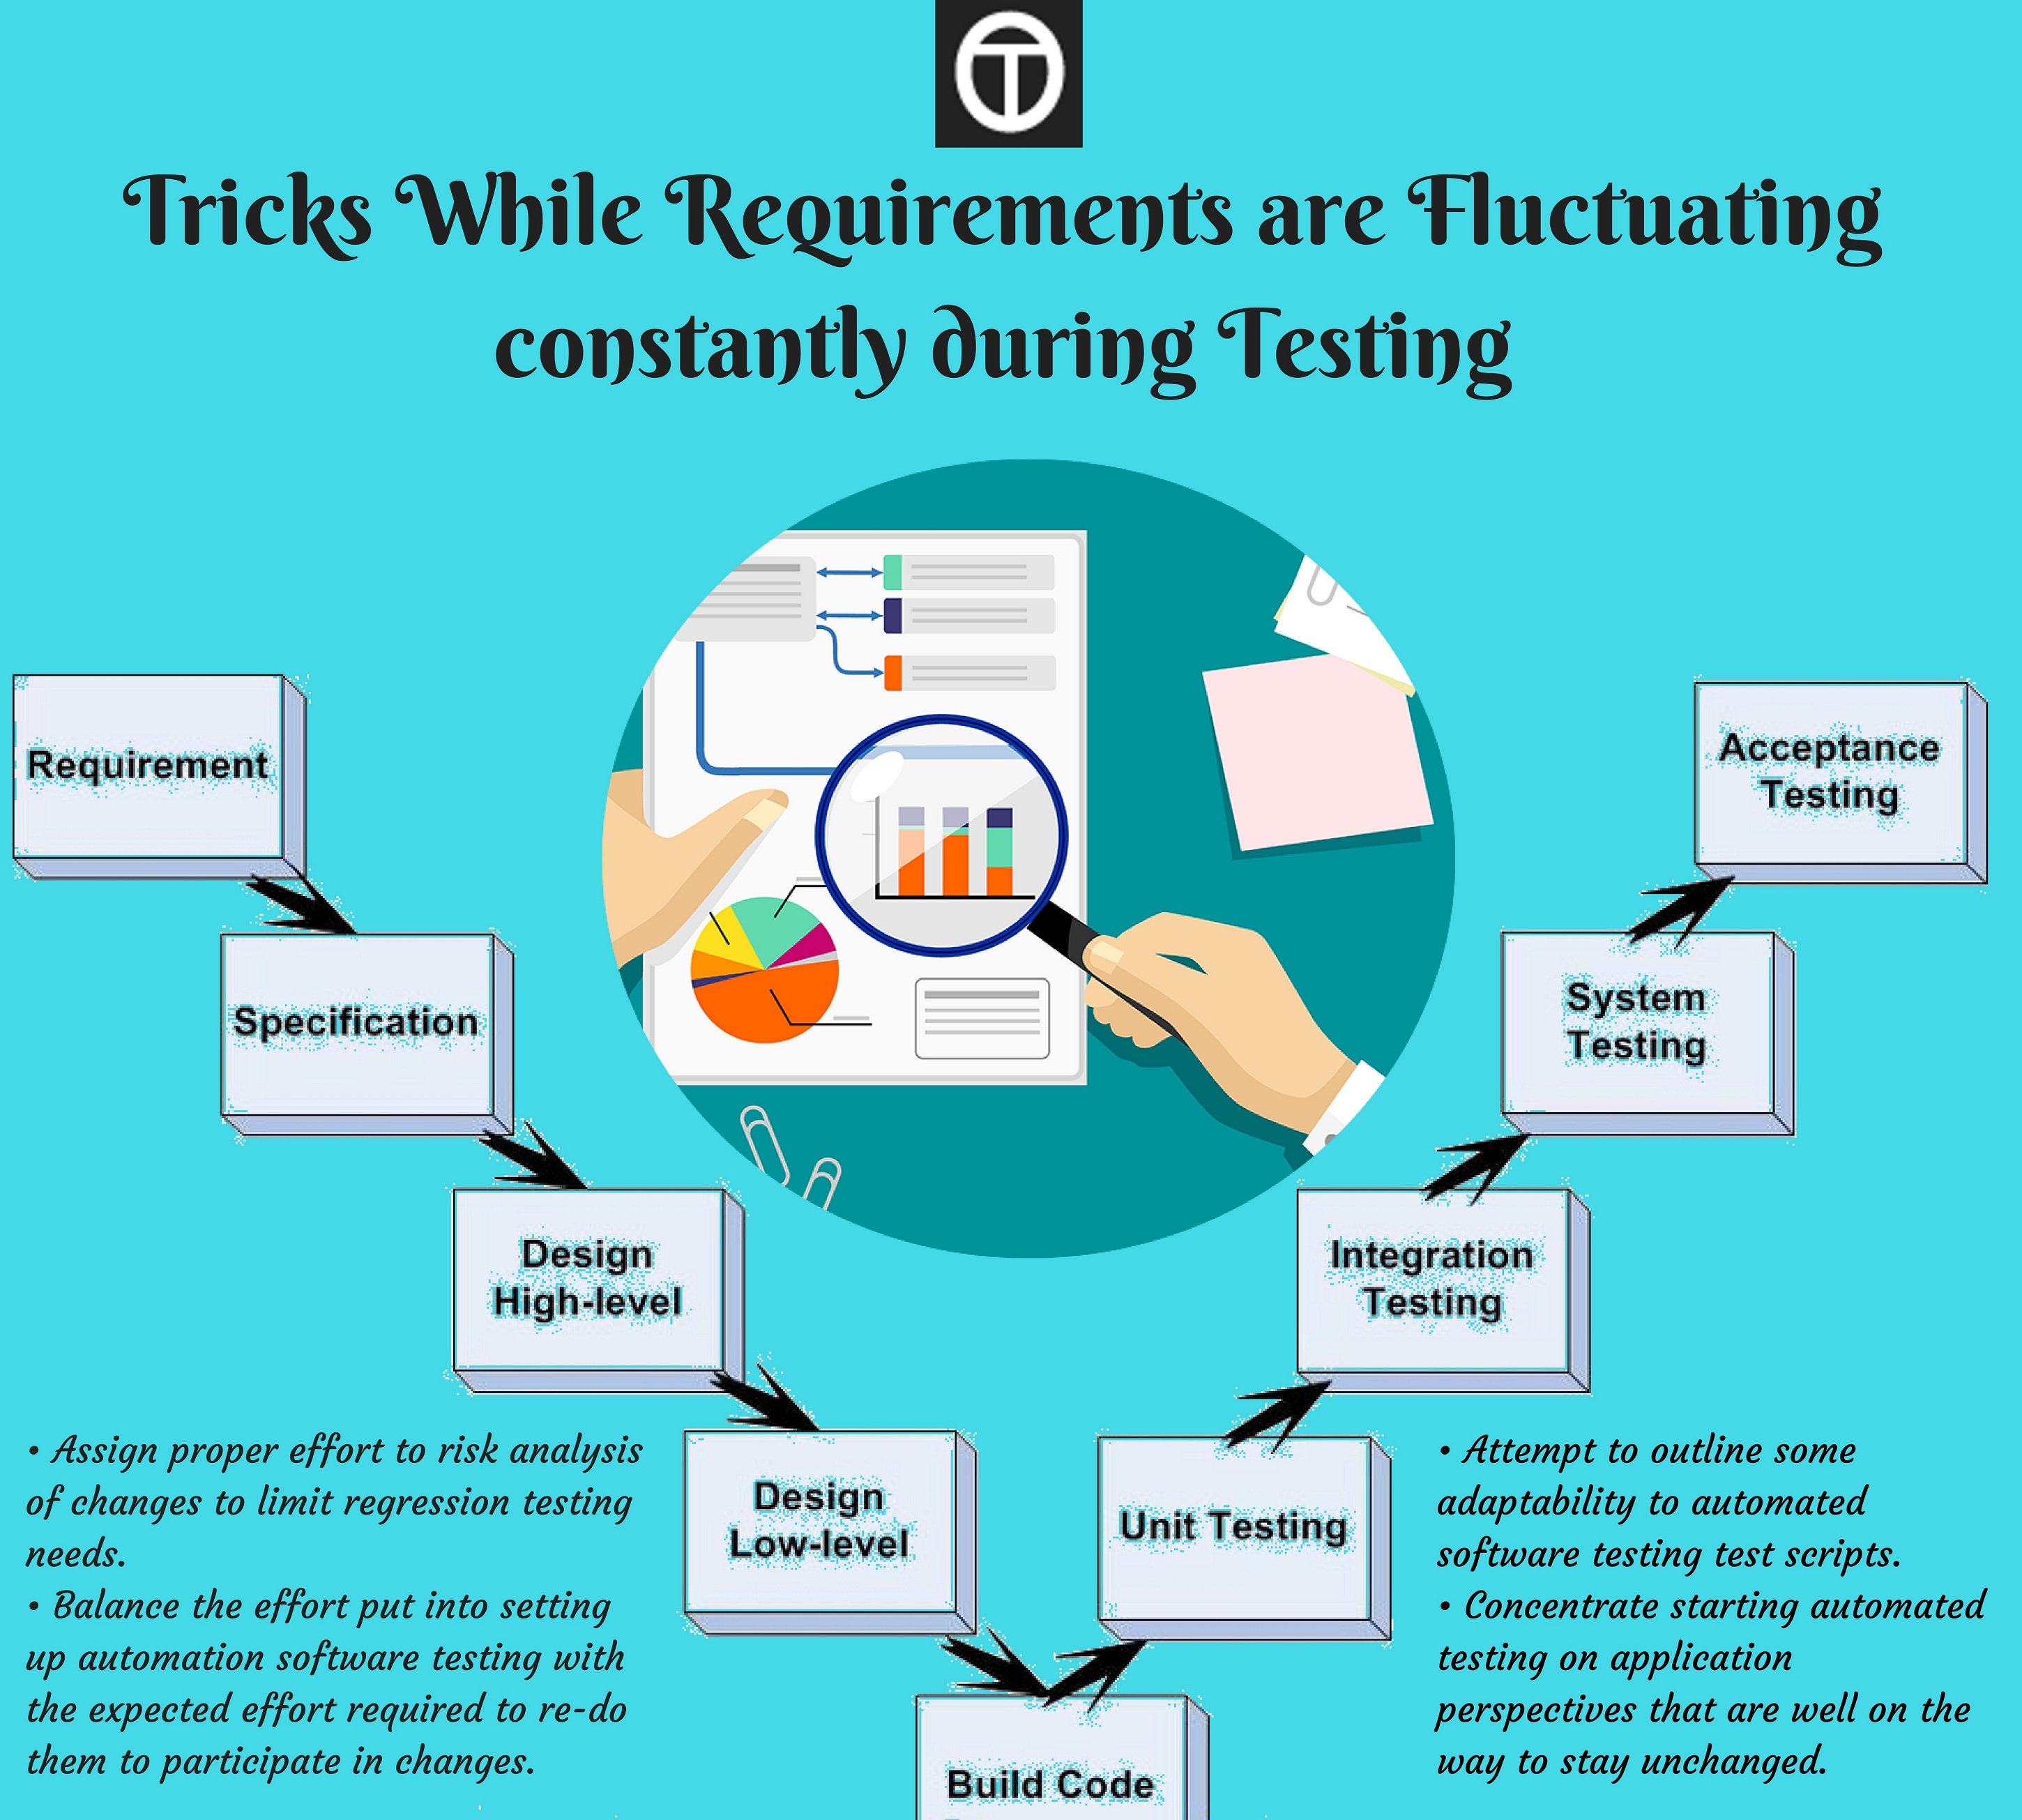 Tricks While Requirements are Fluctuating constantly during Testing